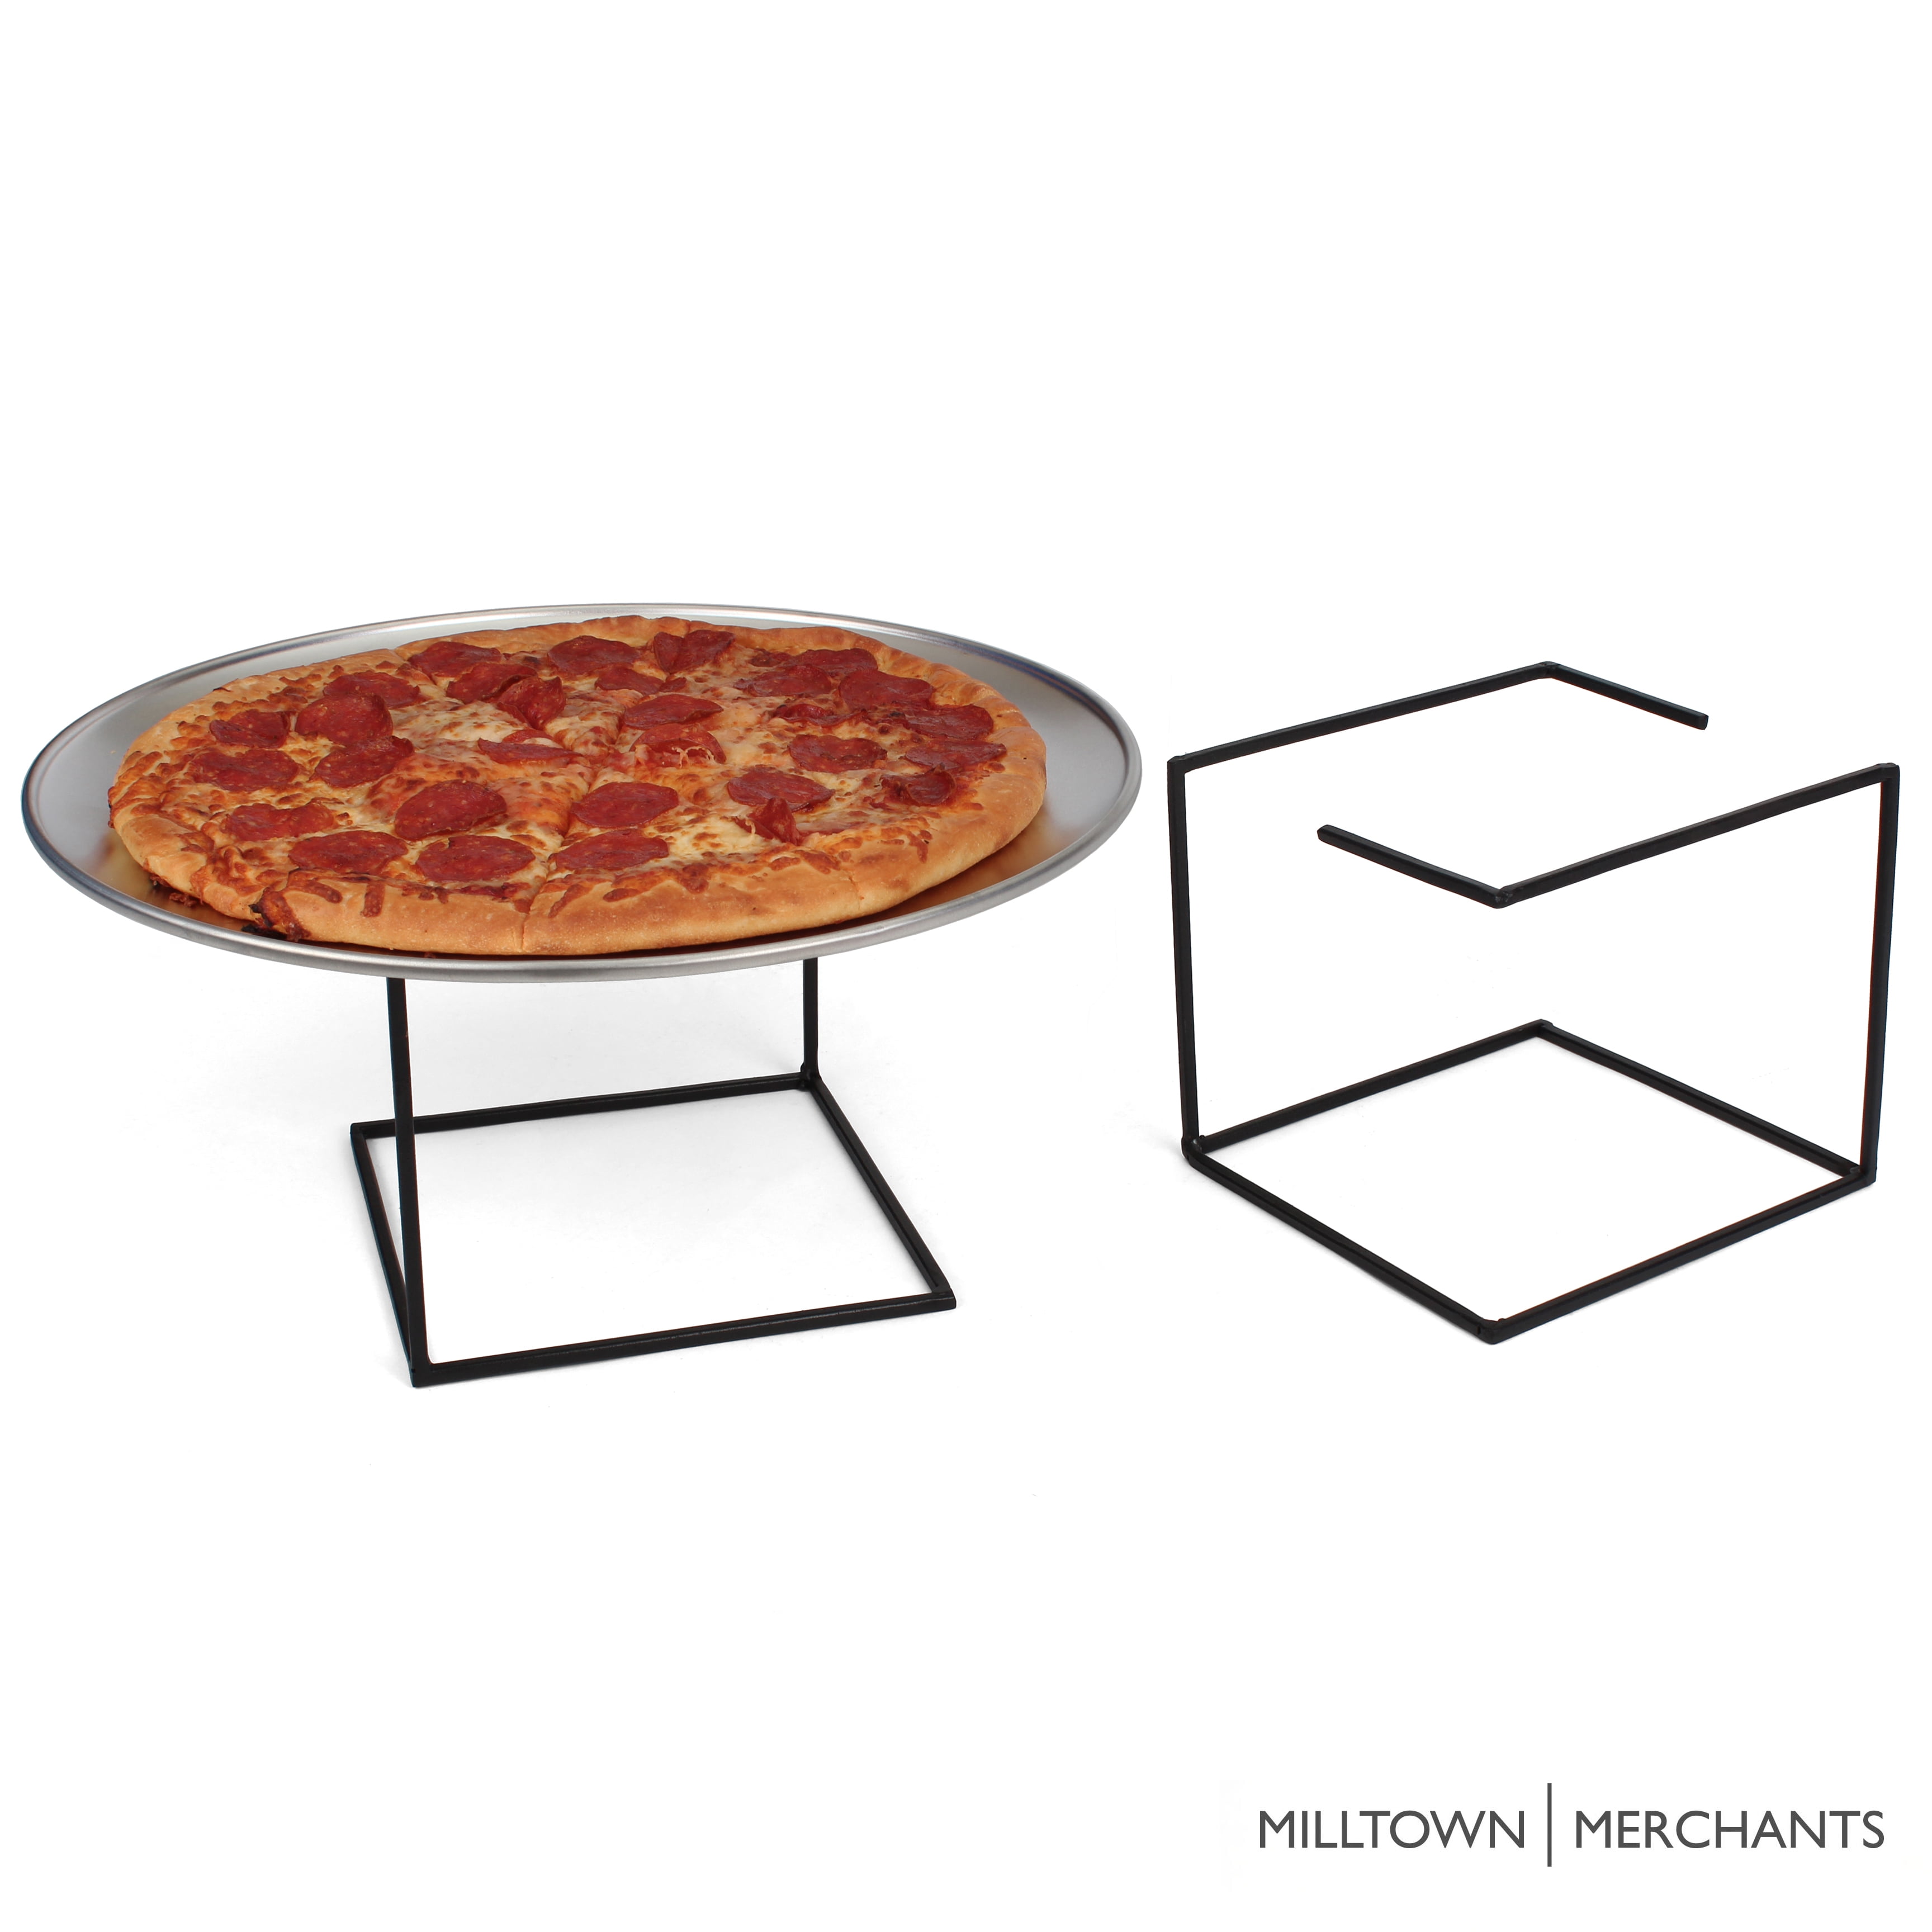 Brass Metal Pizza Table Stands, Tabletop Pizza Pan Riser Food